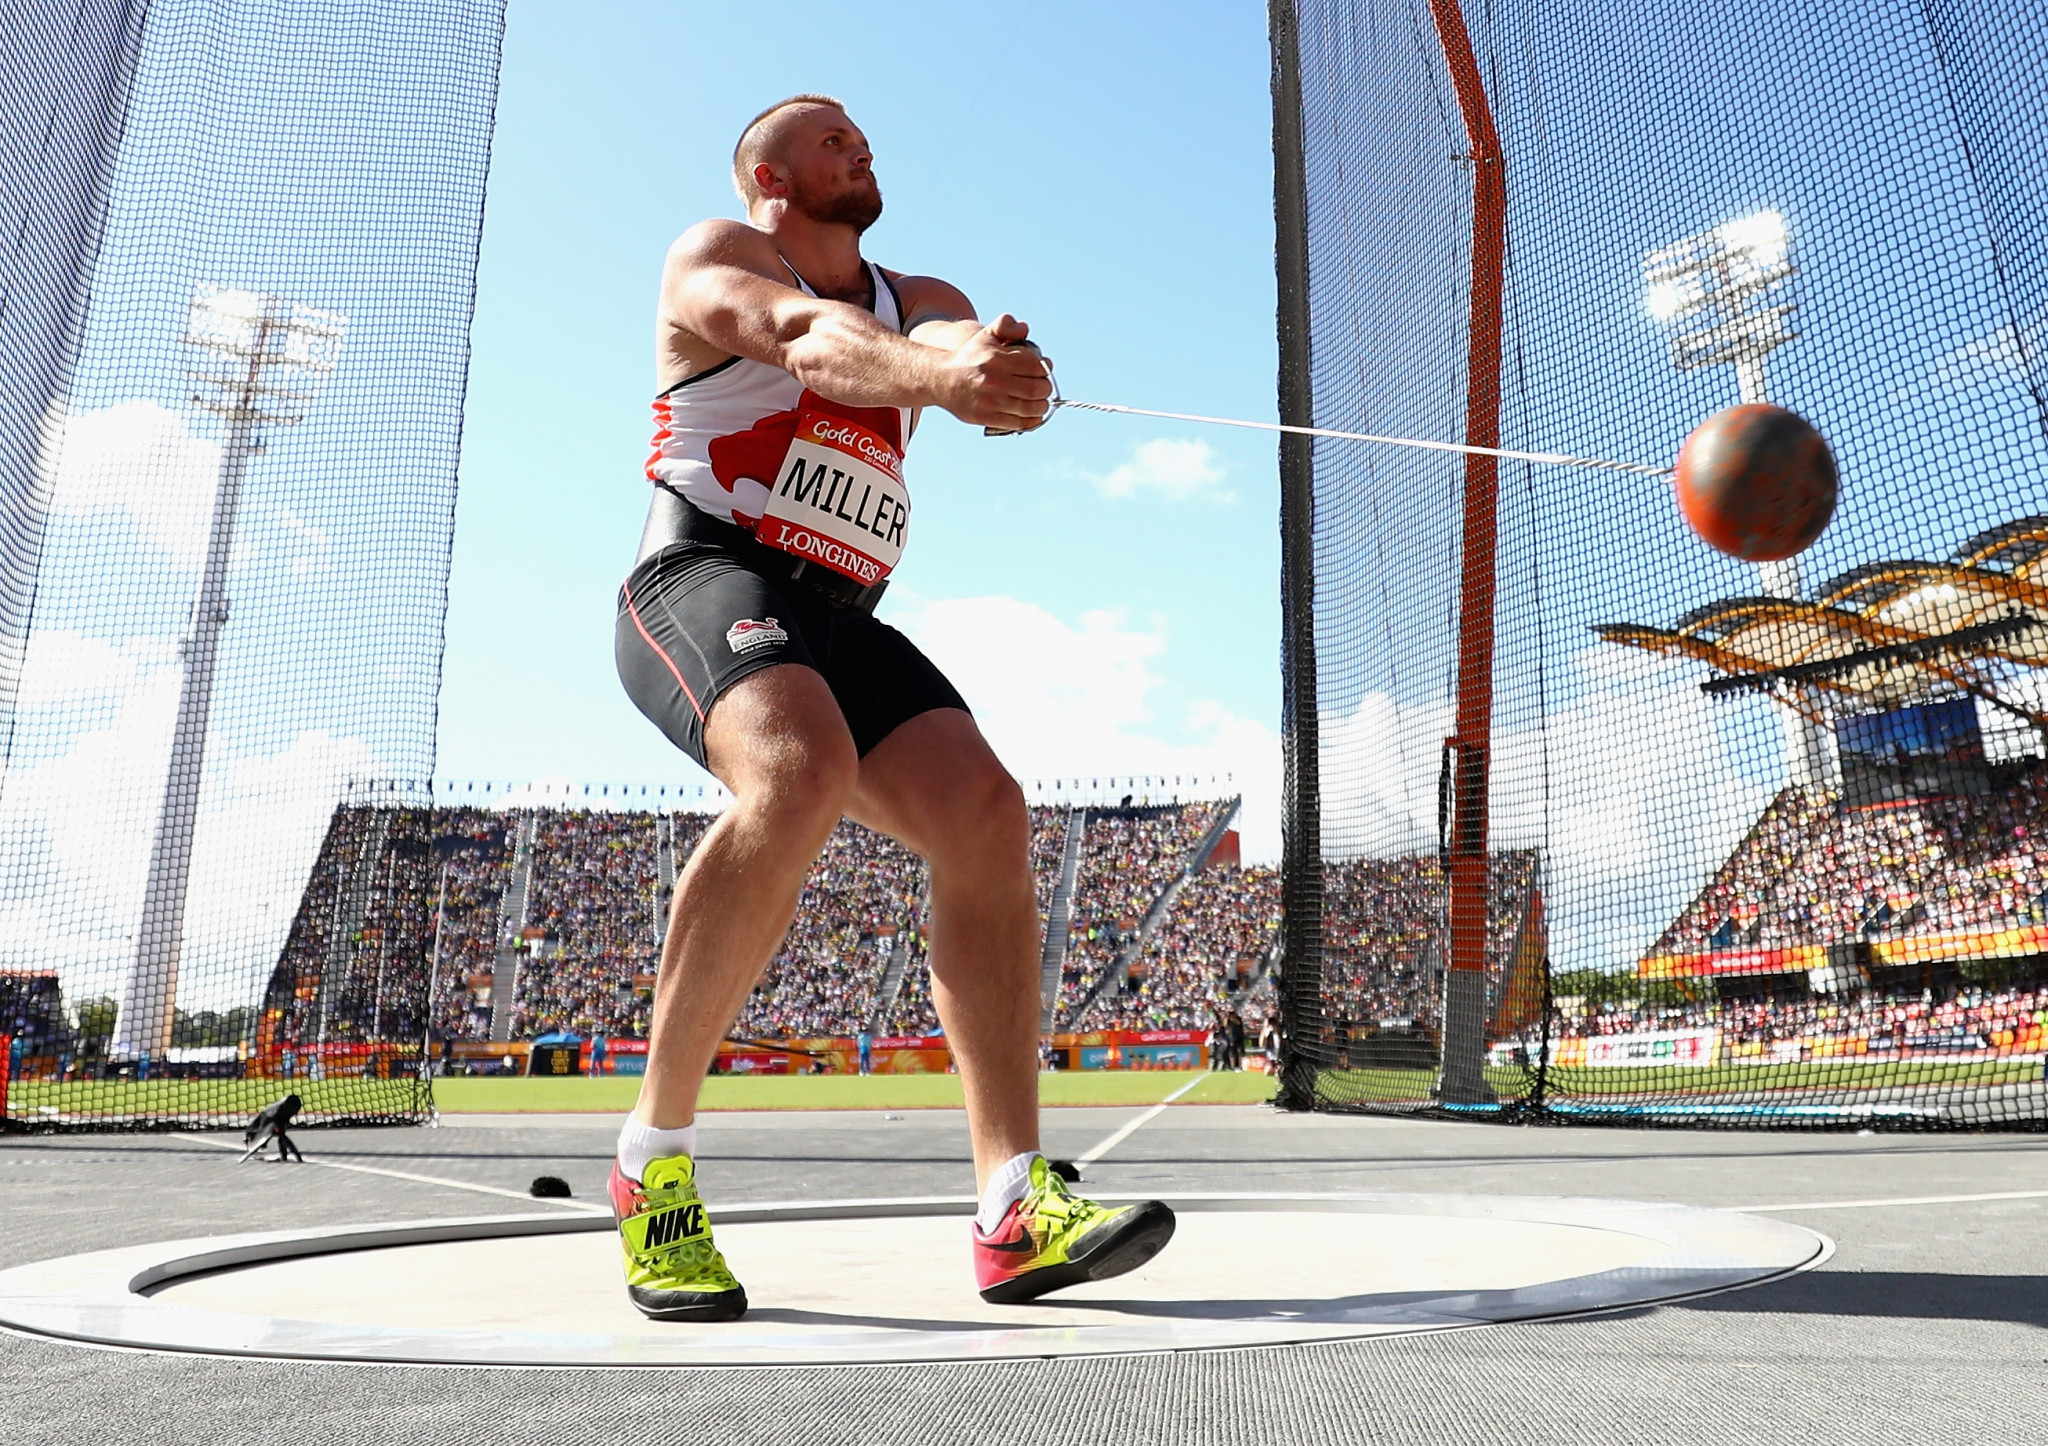 England's Nick Miller broke the Commonwealth Games record to win the hammer ©Getty Images